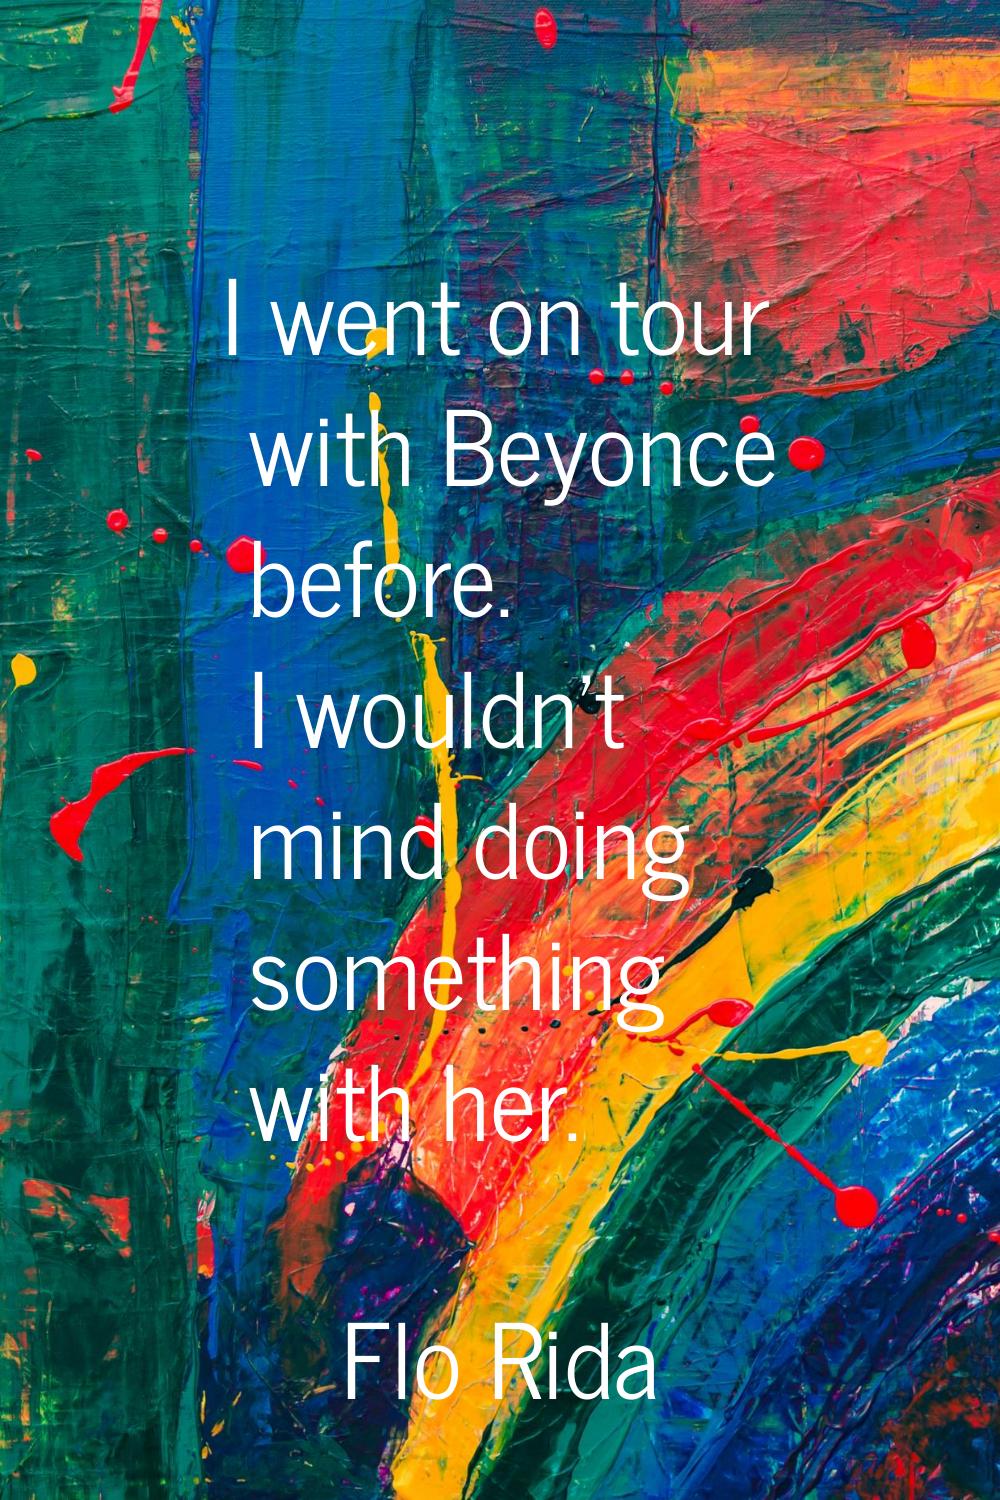 I went on tour with Beyonce before. I wouldn't mind doing something with her.